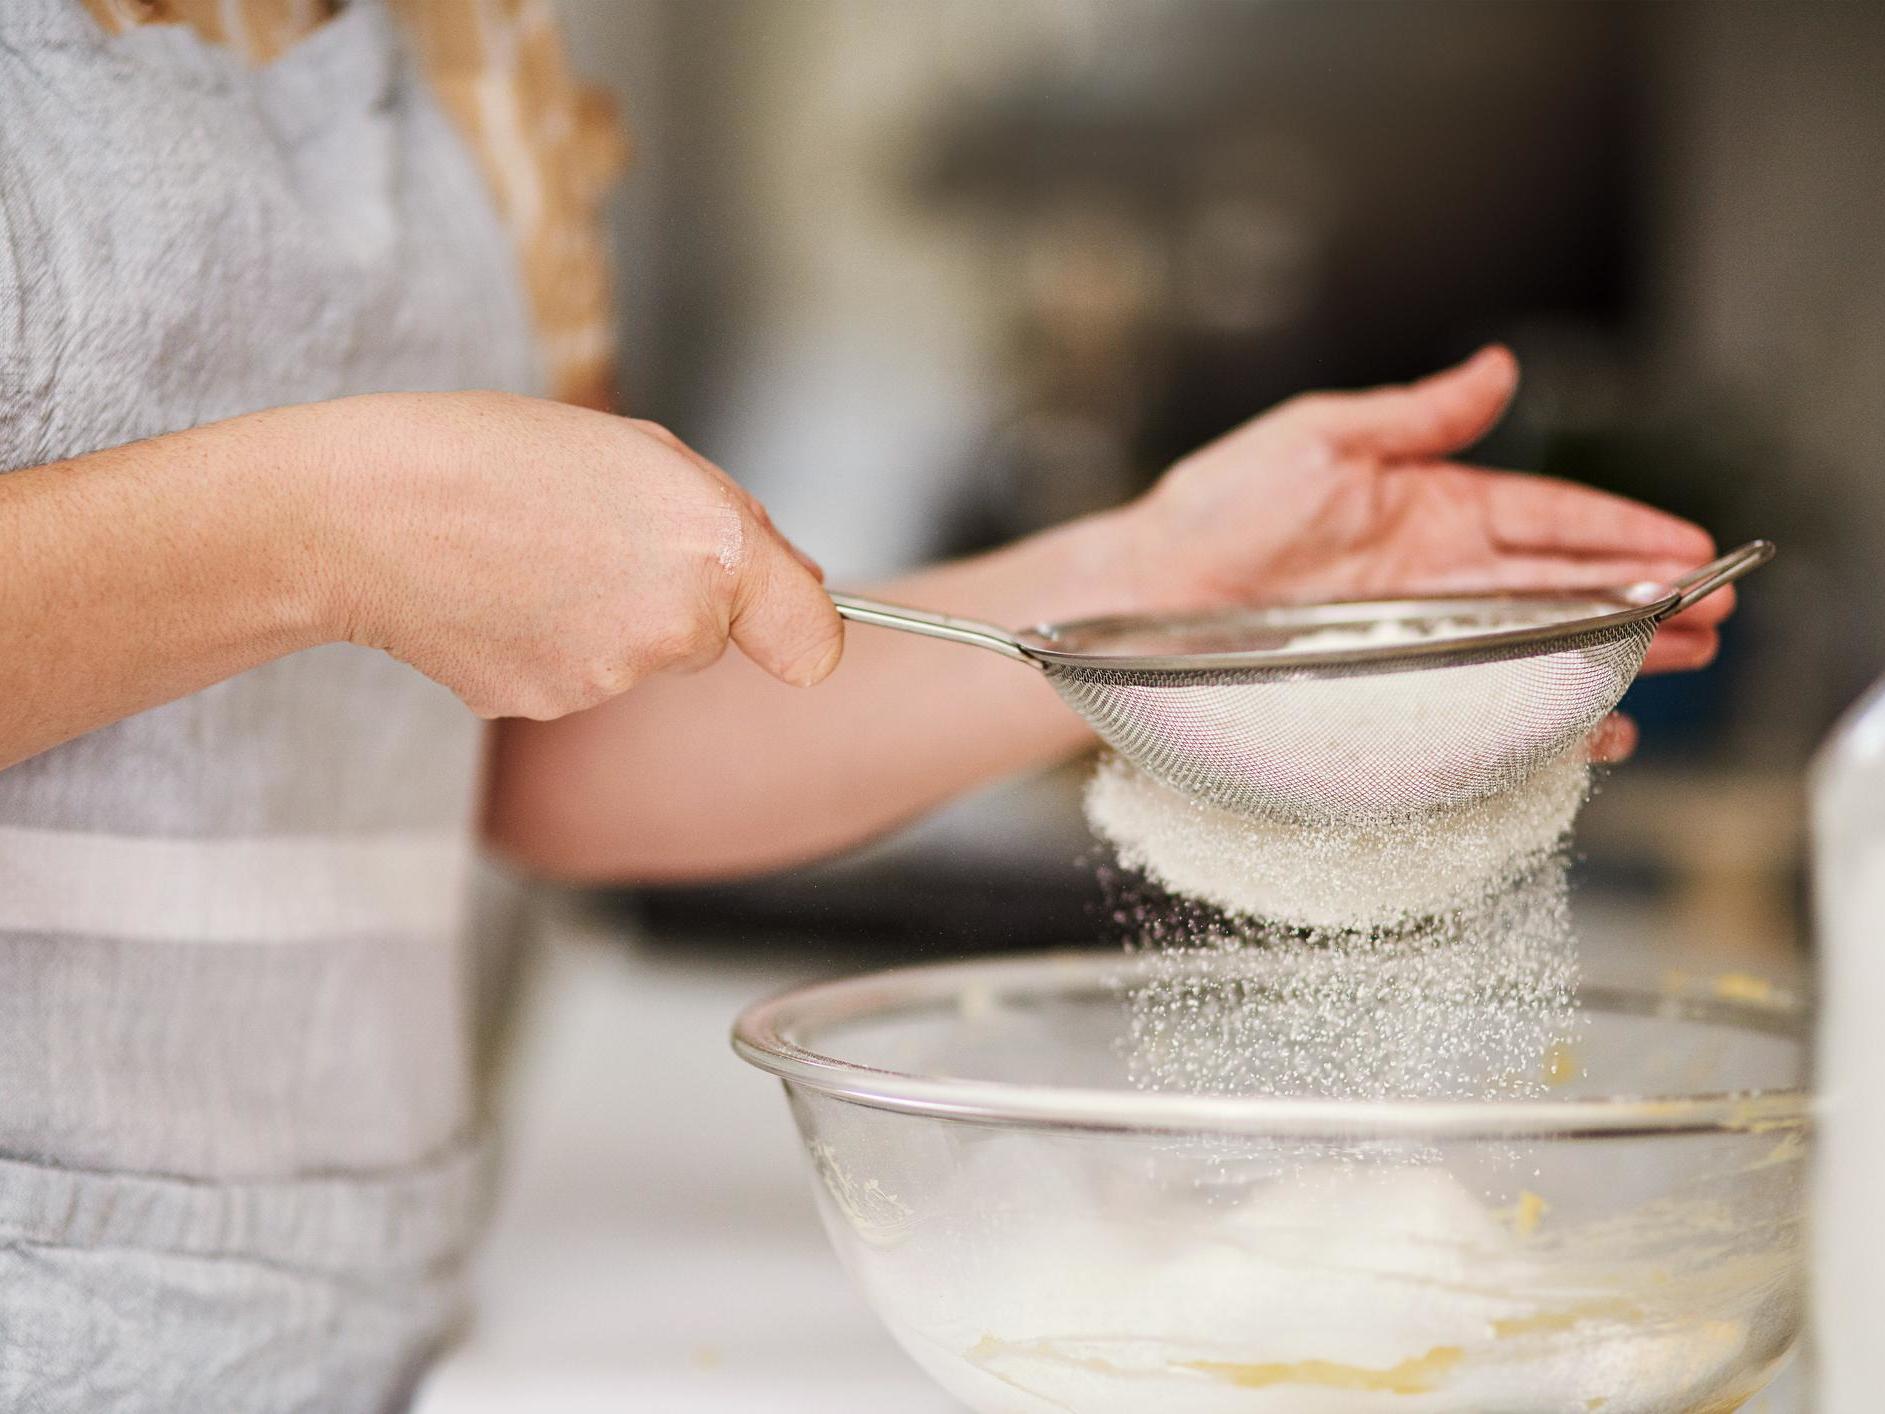 Increasing interest in home-baking is leaving shops struggling to meet demand